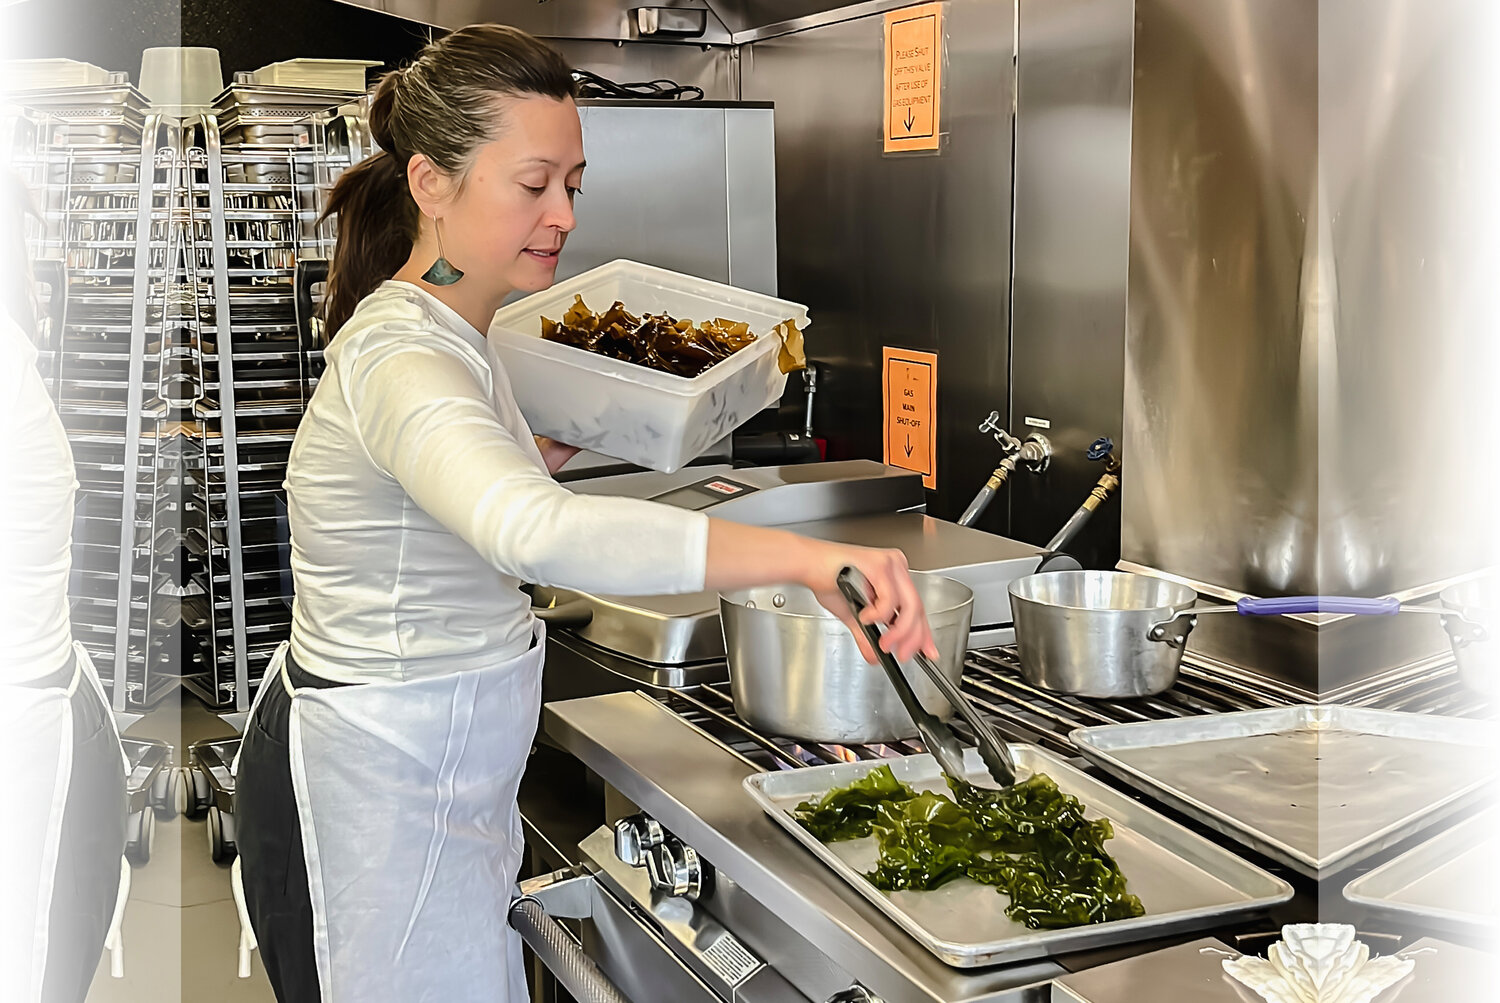 Sugar kelp training with visiting chef Tami Grooney from White Gate Farm